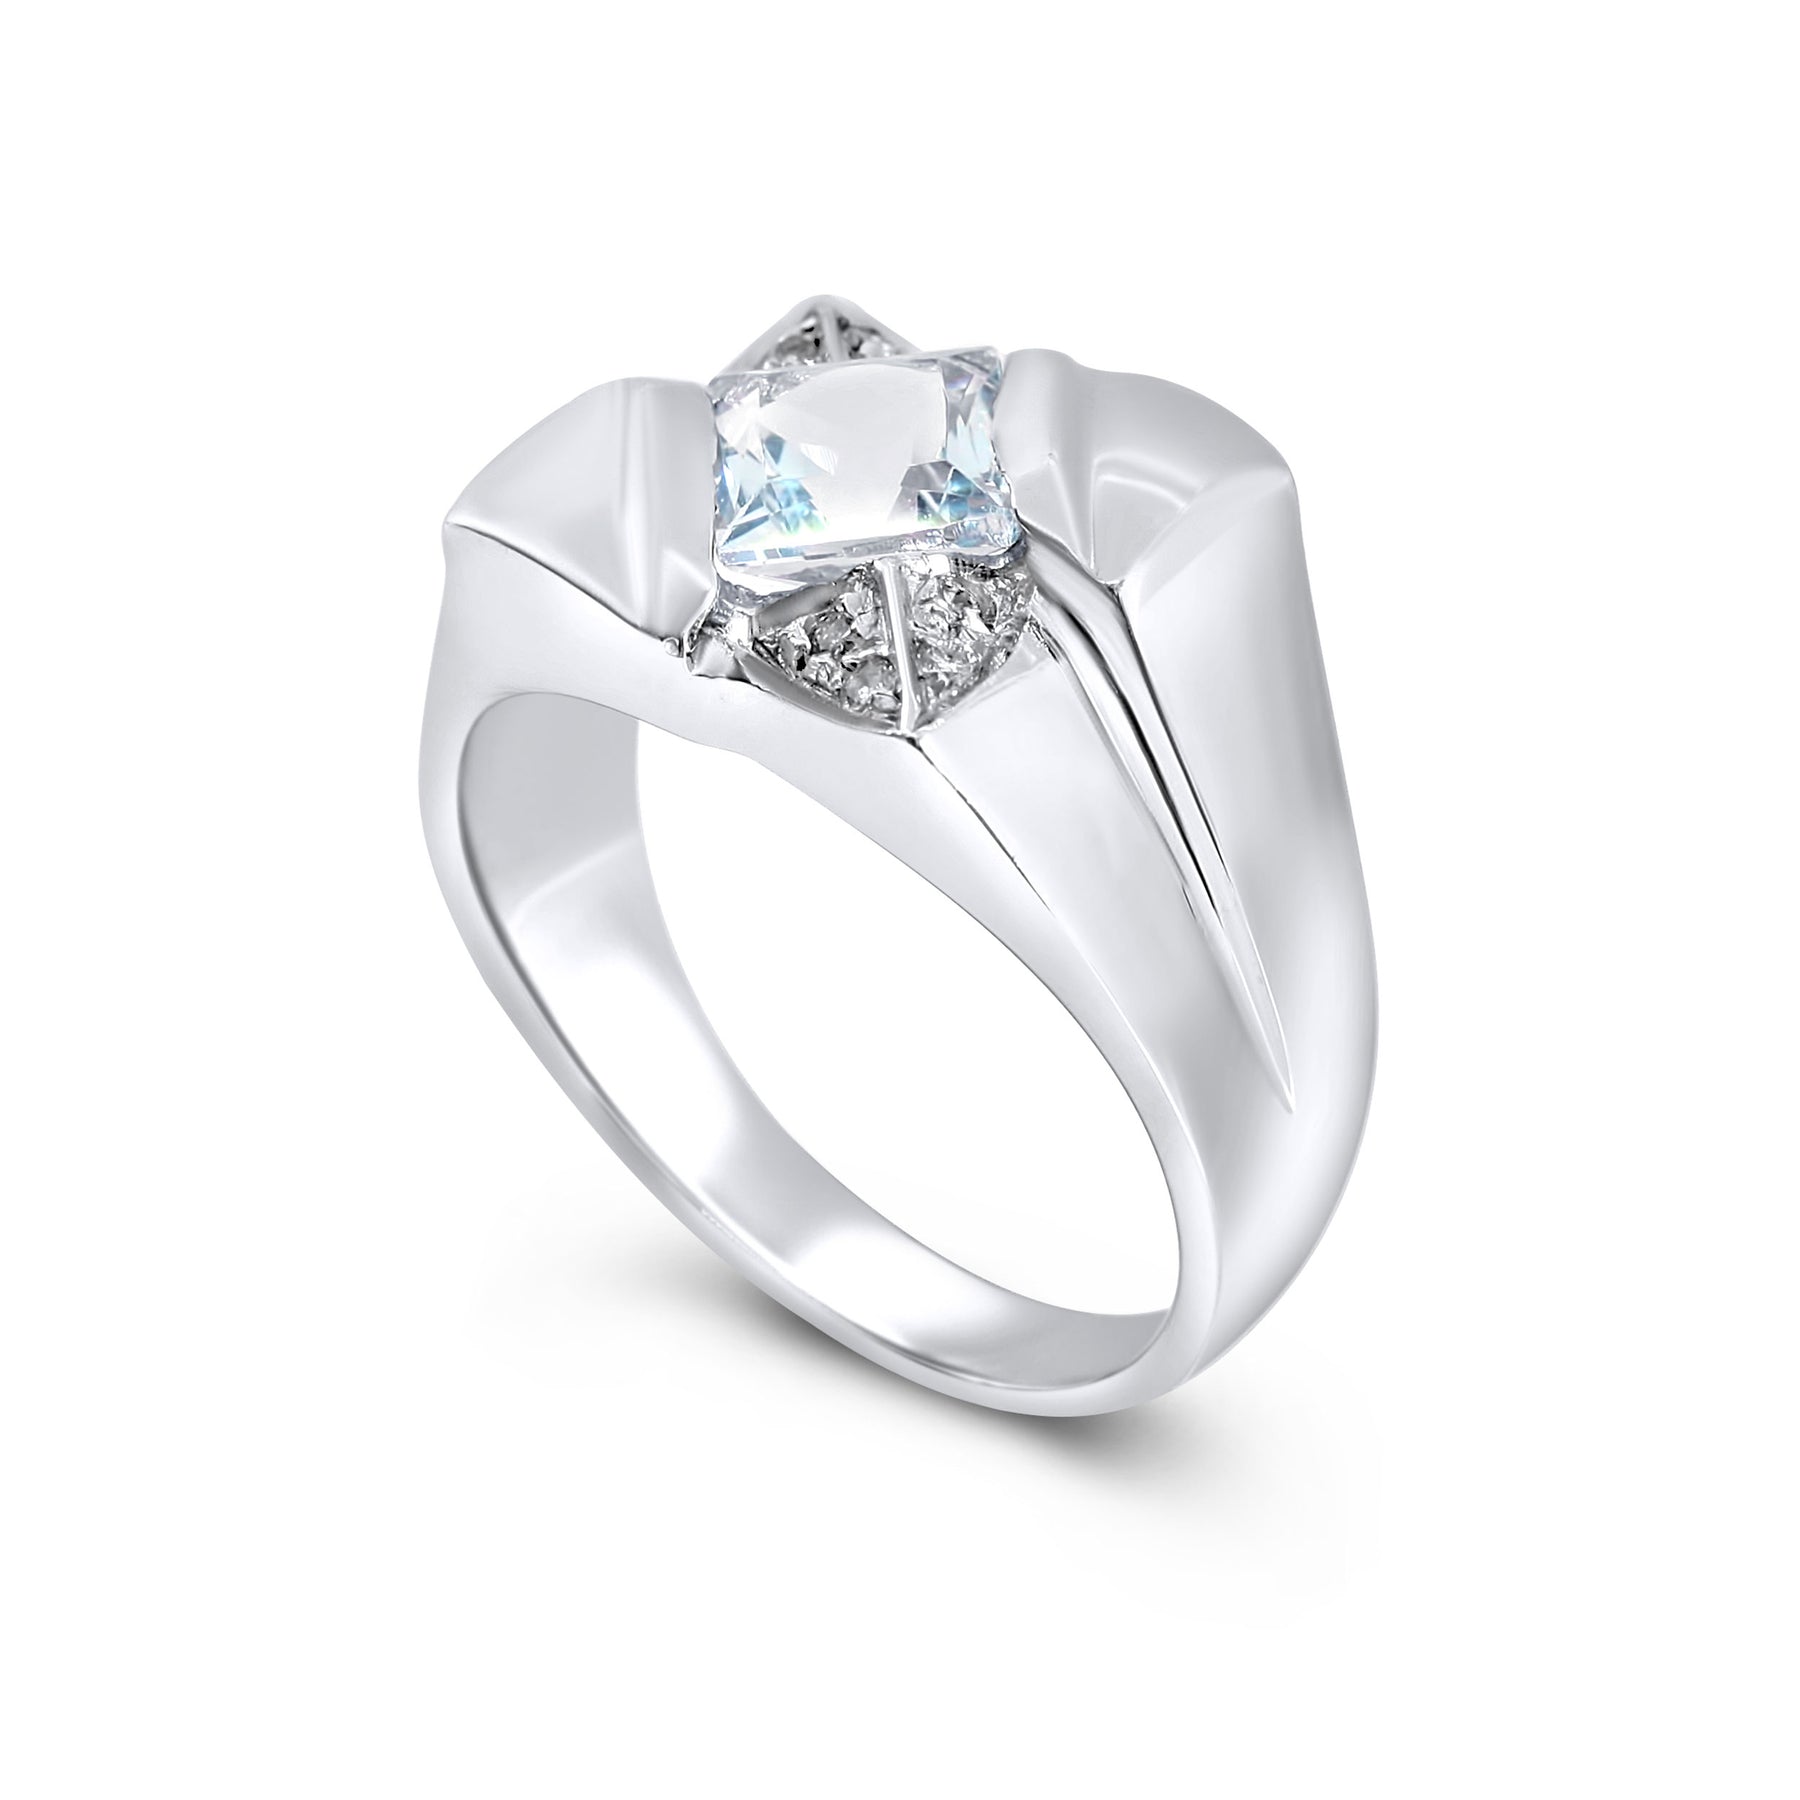 North Star Ring With Blue Topaz